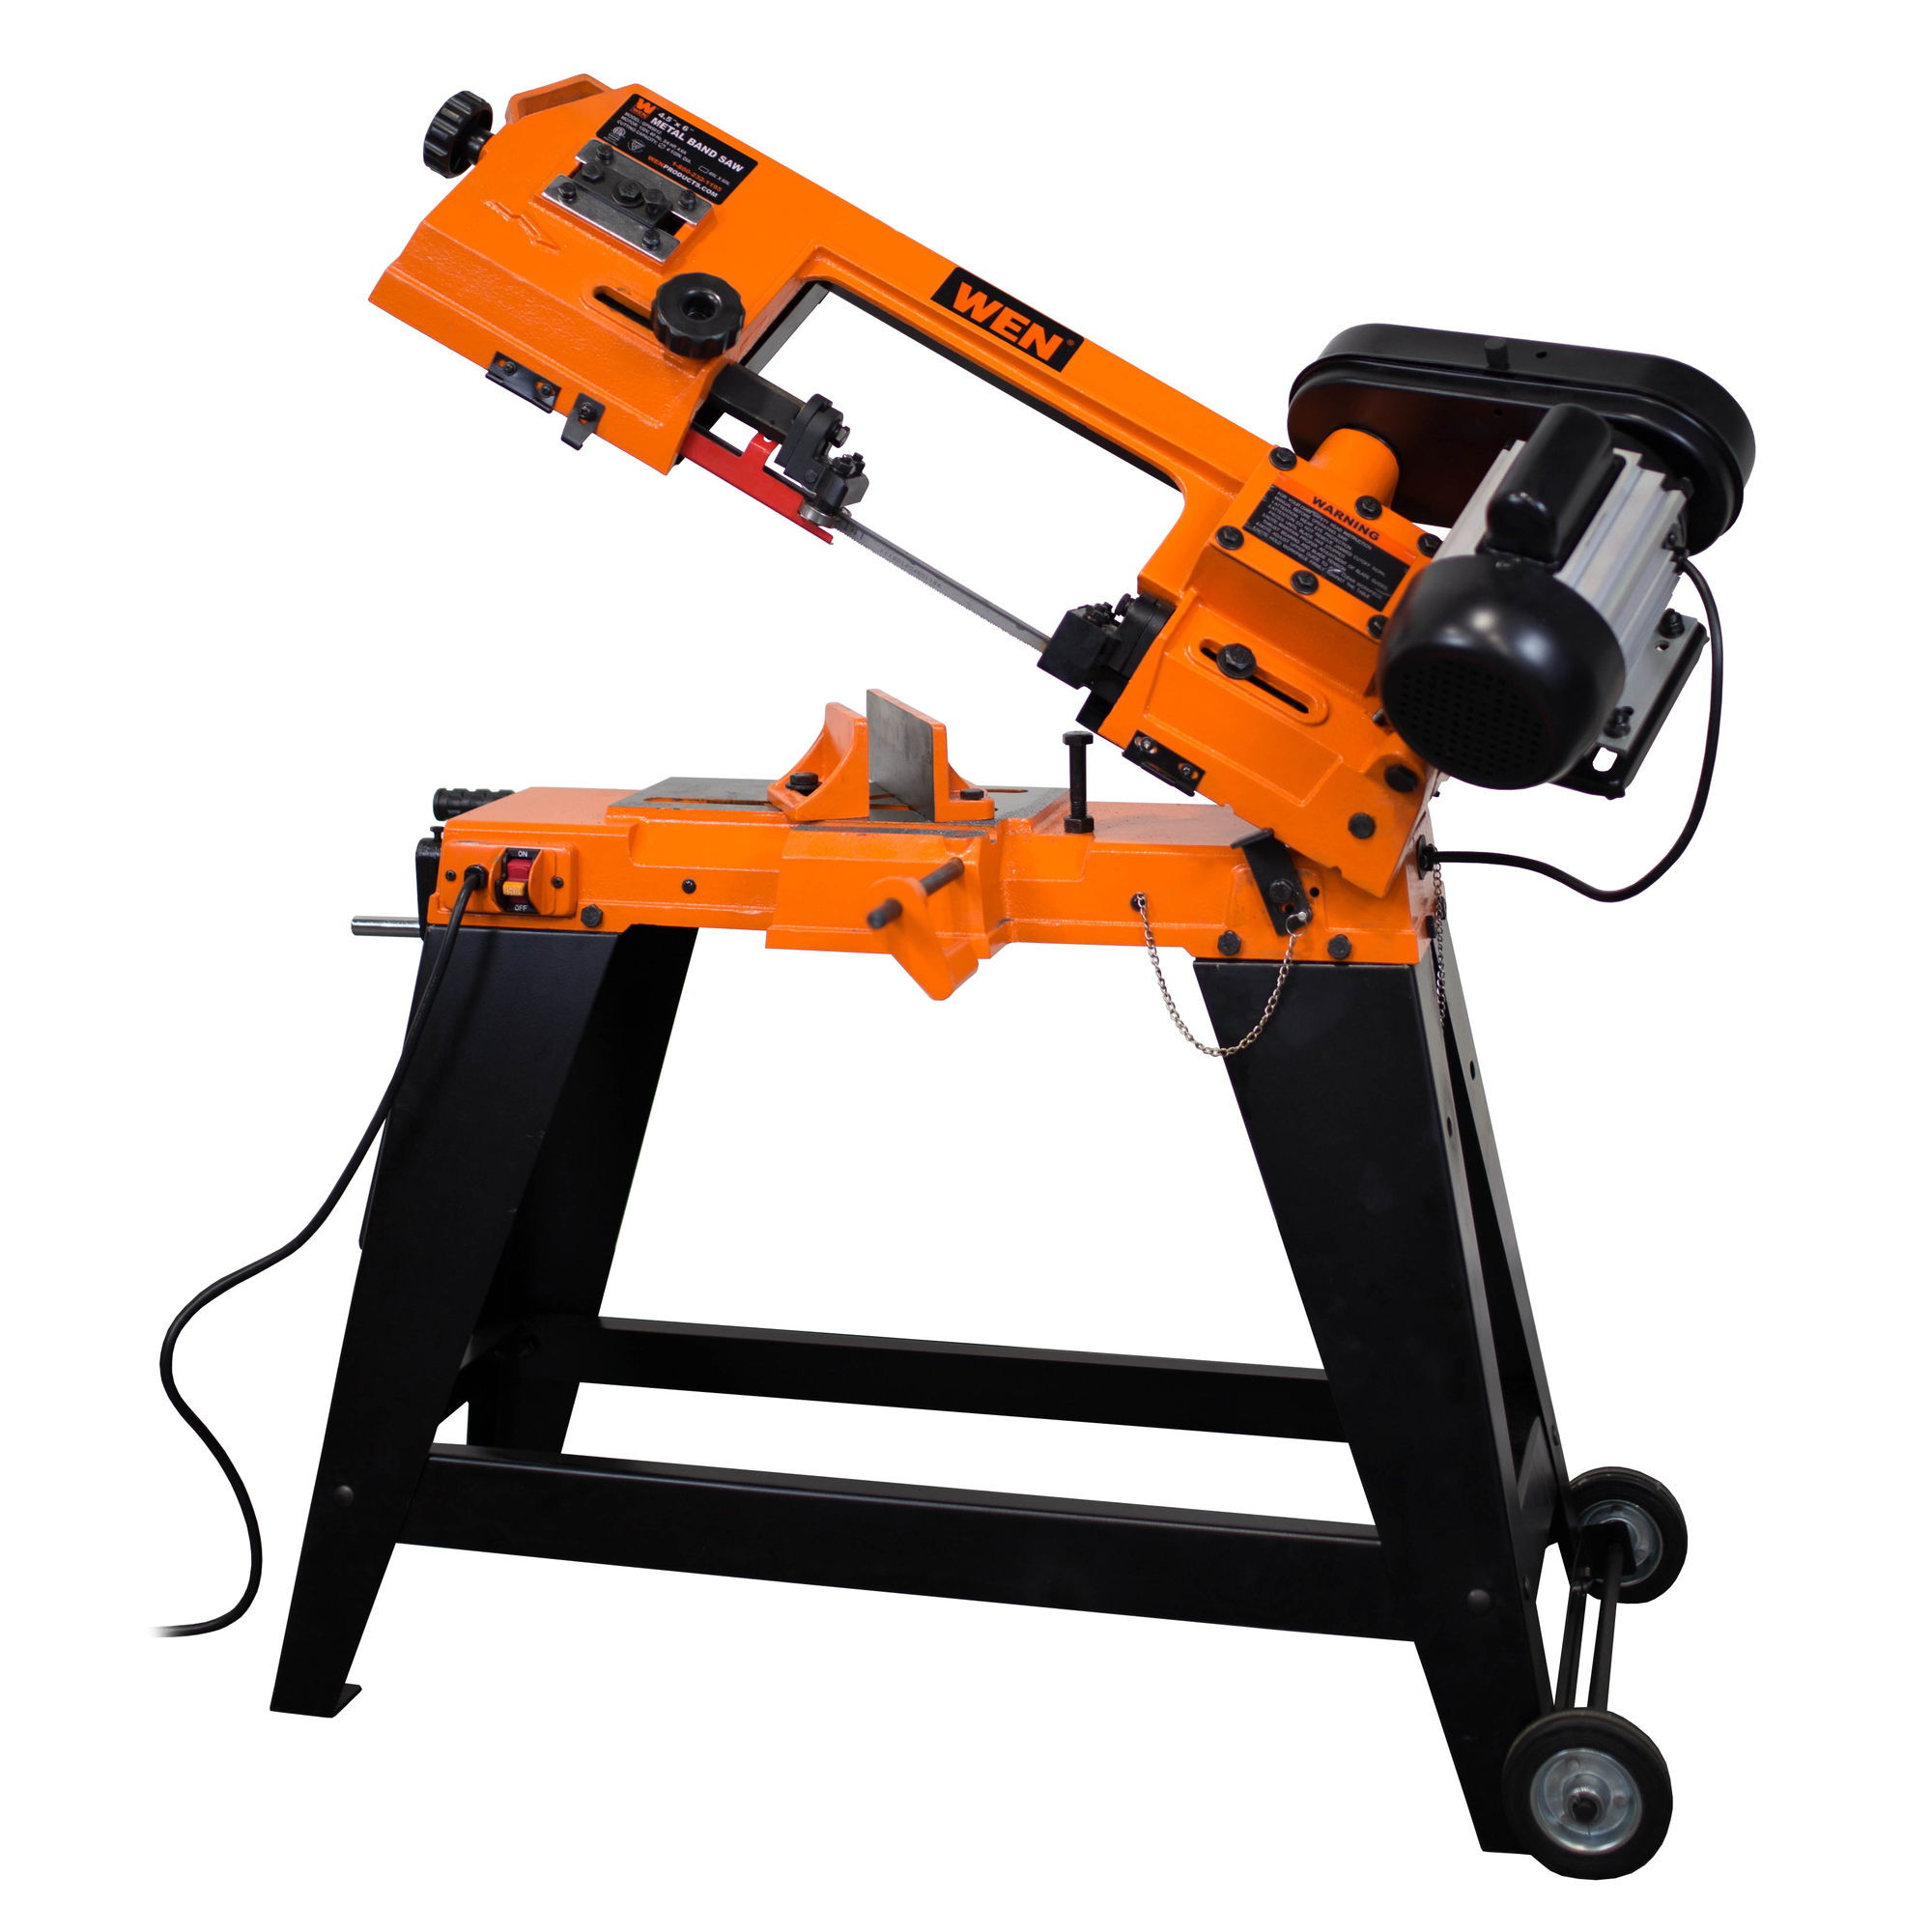 WEN, 4-by-6Inch Metal-Cutting Band Saw with Stand, Volts 120, Power Type Corded, Model BA4664